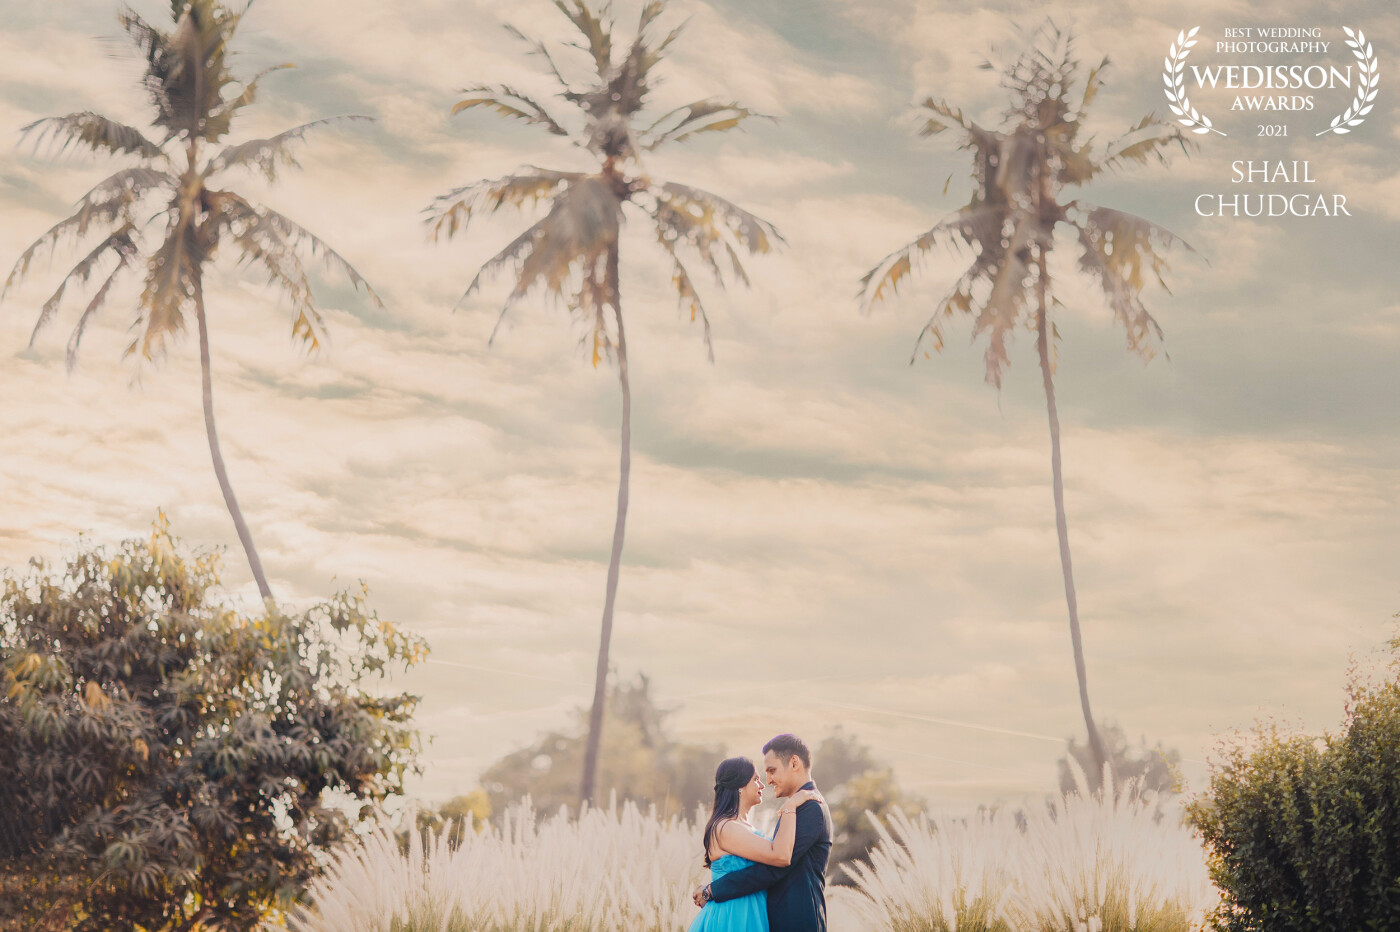 A mixture of a dramatic sky, swaying palm trees, greenery and the lovely couple looking into each others eyes! Romance + Drama all in one!